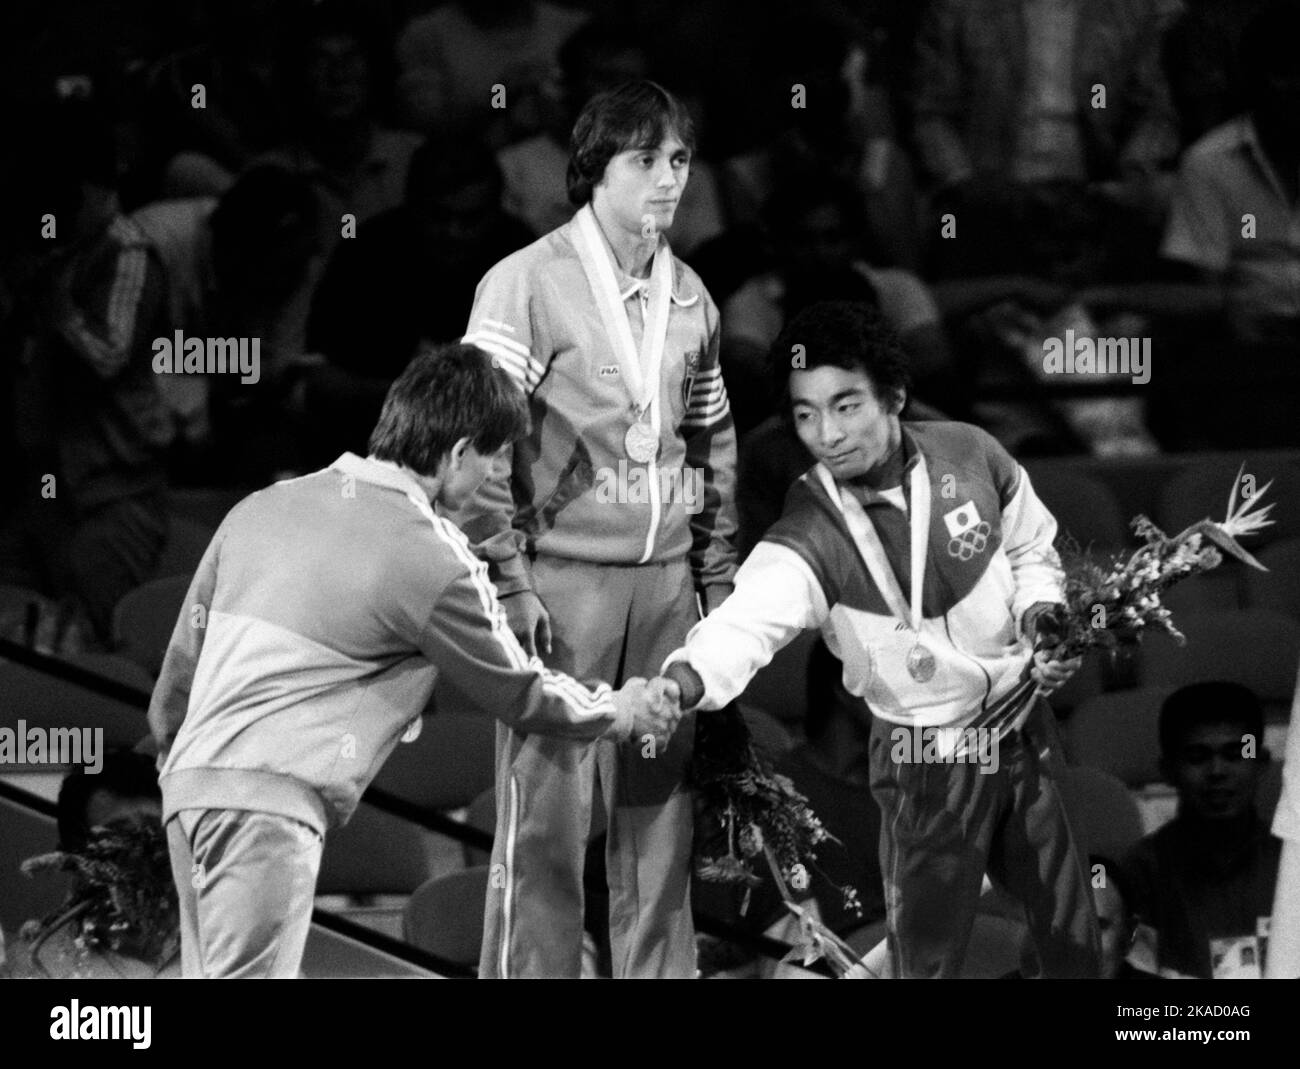 OLYMPIC SUMMERGAMES IN LOS ANGELES USA 1984 Vincent Maenza Italy win light flyweight on podium with Markus Scherer Germany and Ikuzo Saito Japan Stock Photo